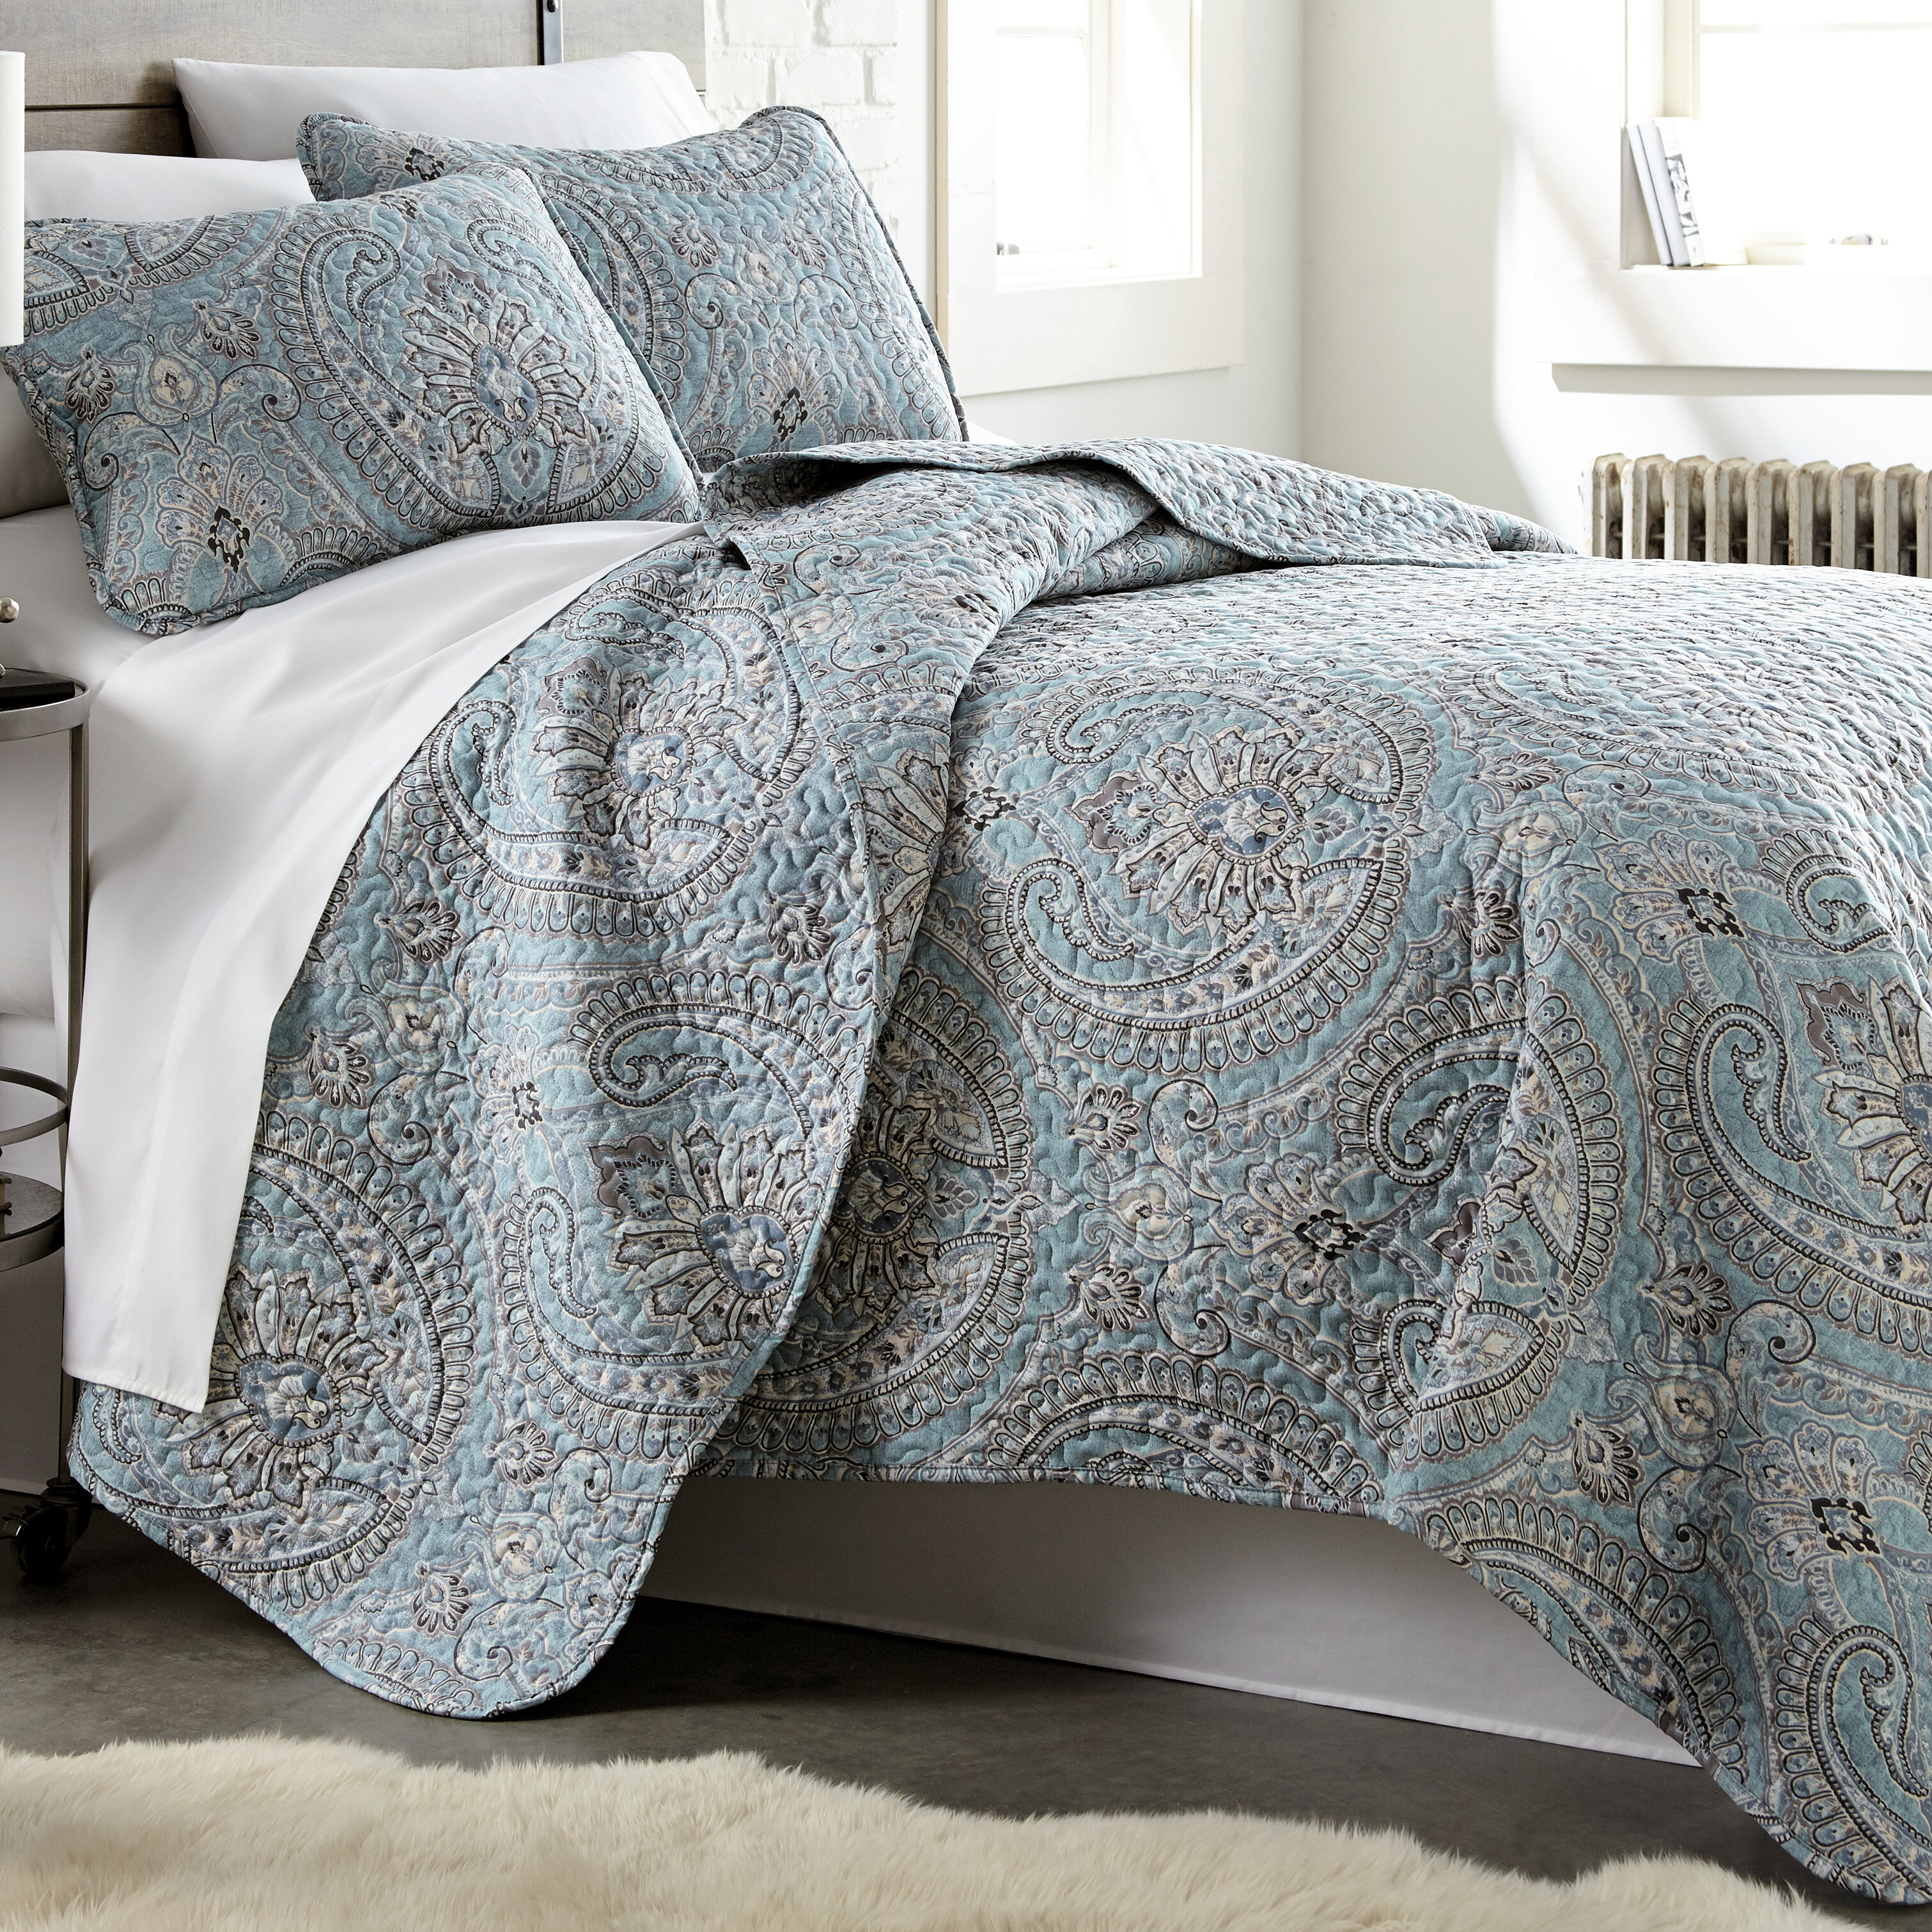 lightweight quilts and coverlets